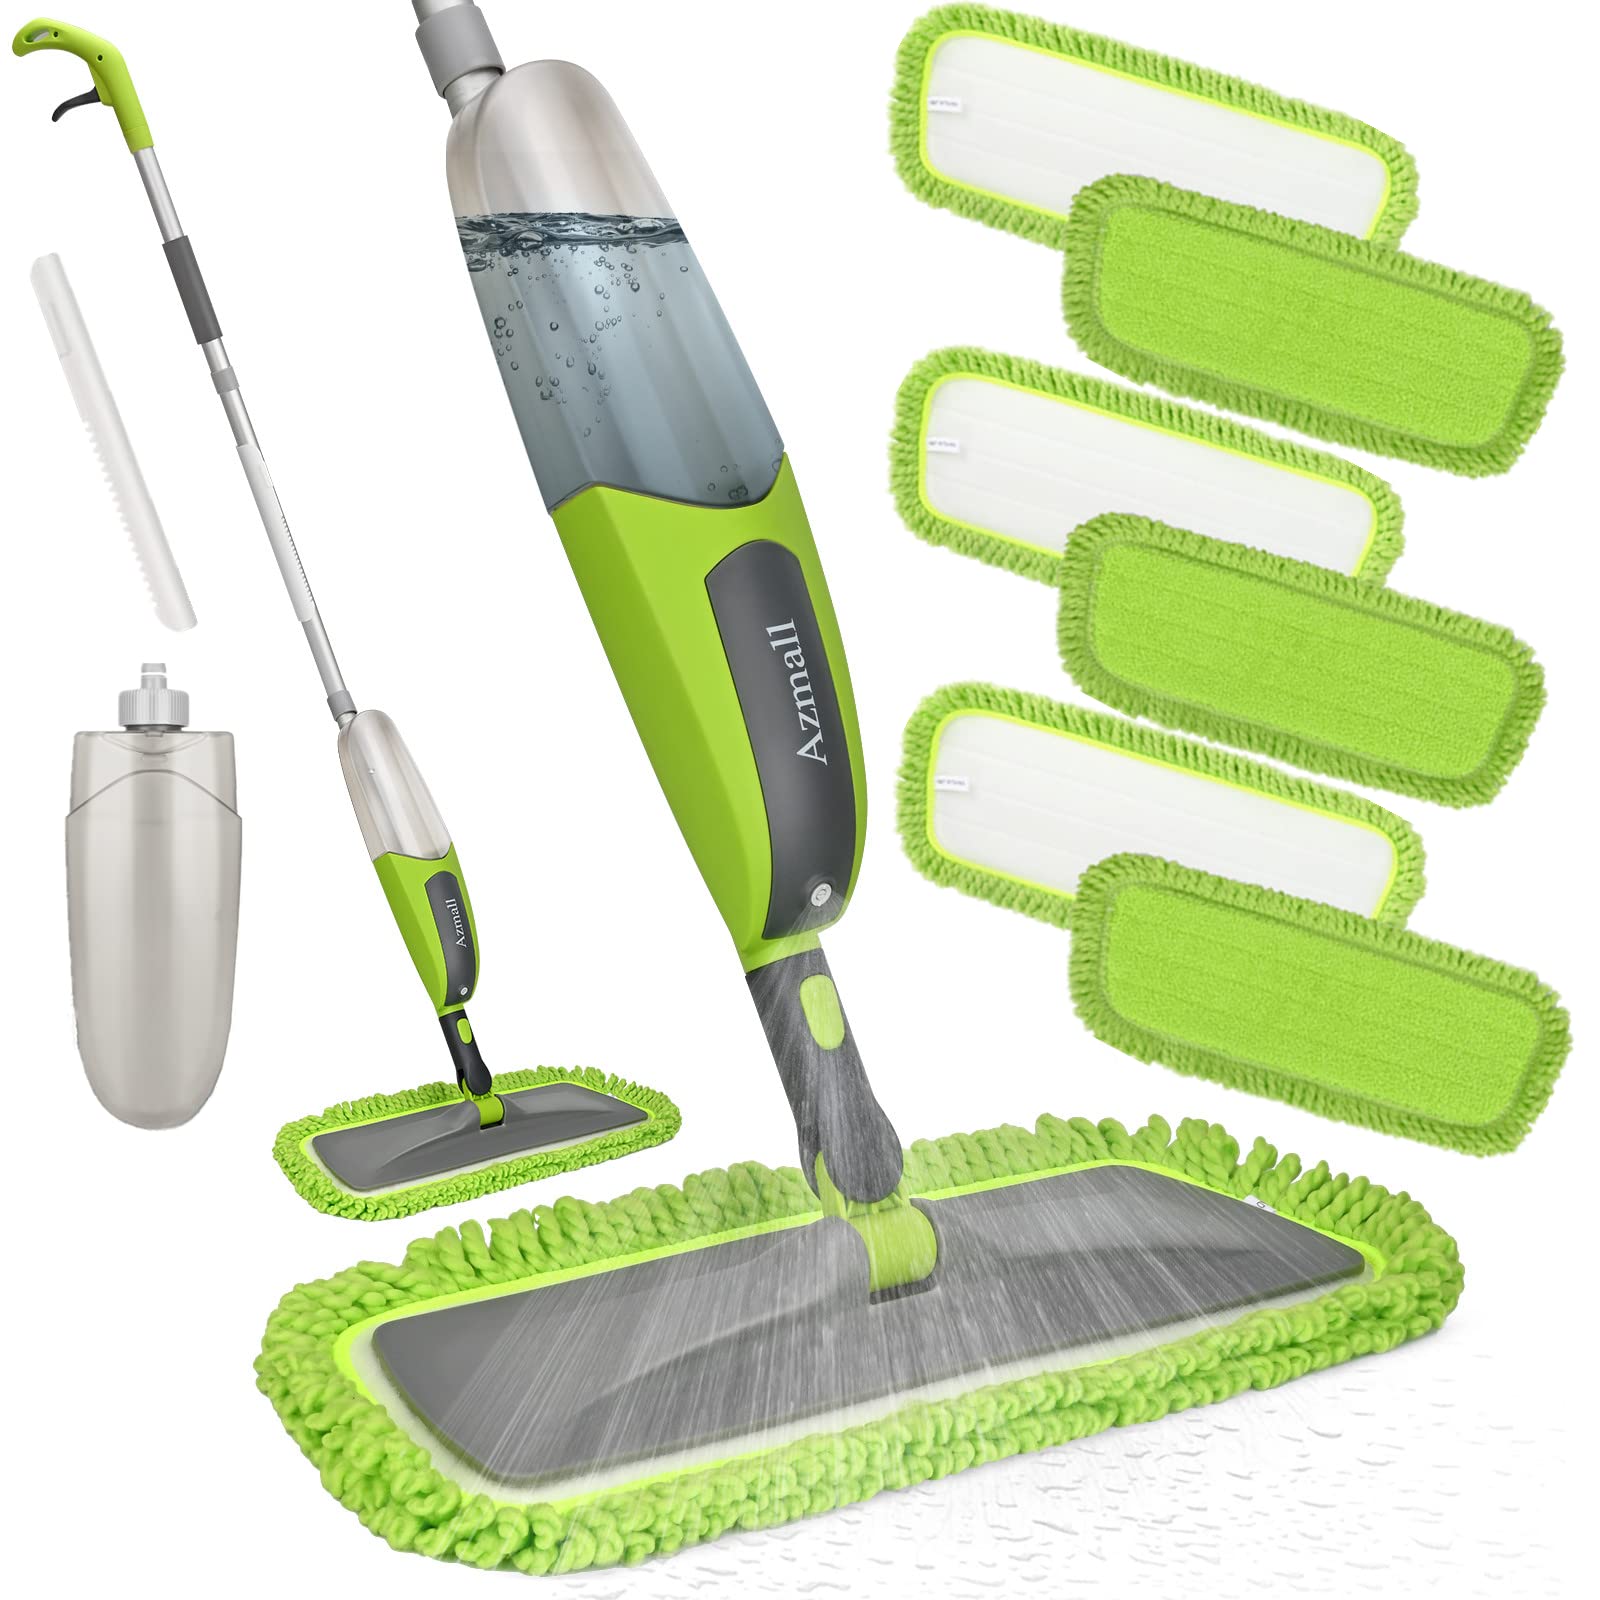 Spray Mop Sets Mops for Floor Cleaning Home or Commercial Wet Dry Mop with  400ml Refillable Bottle & 3 Microfiber Pads & 1 Scraper for hardwood